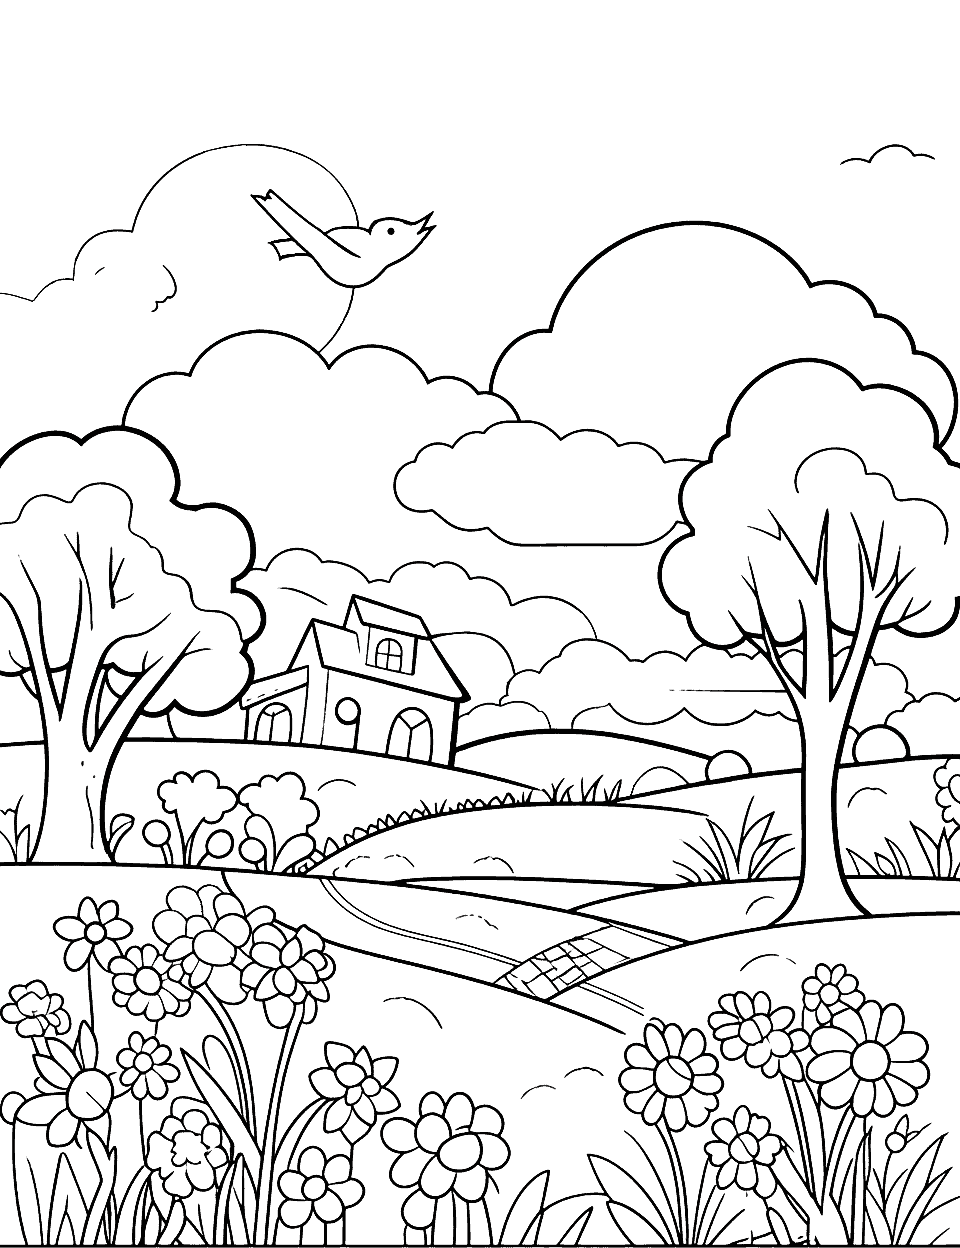 Springtime Nature Easter Coloring Page - A picturesque scene of springtime nature featuring blossoming trees, chirping birds, and a sunny sky, evoking the Easter spirit.